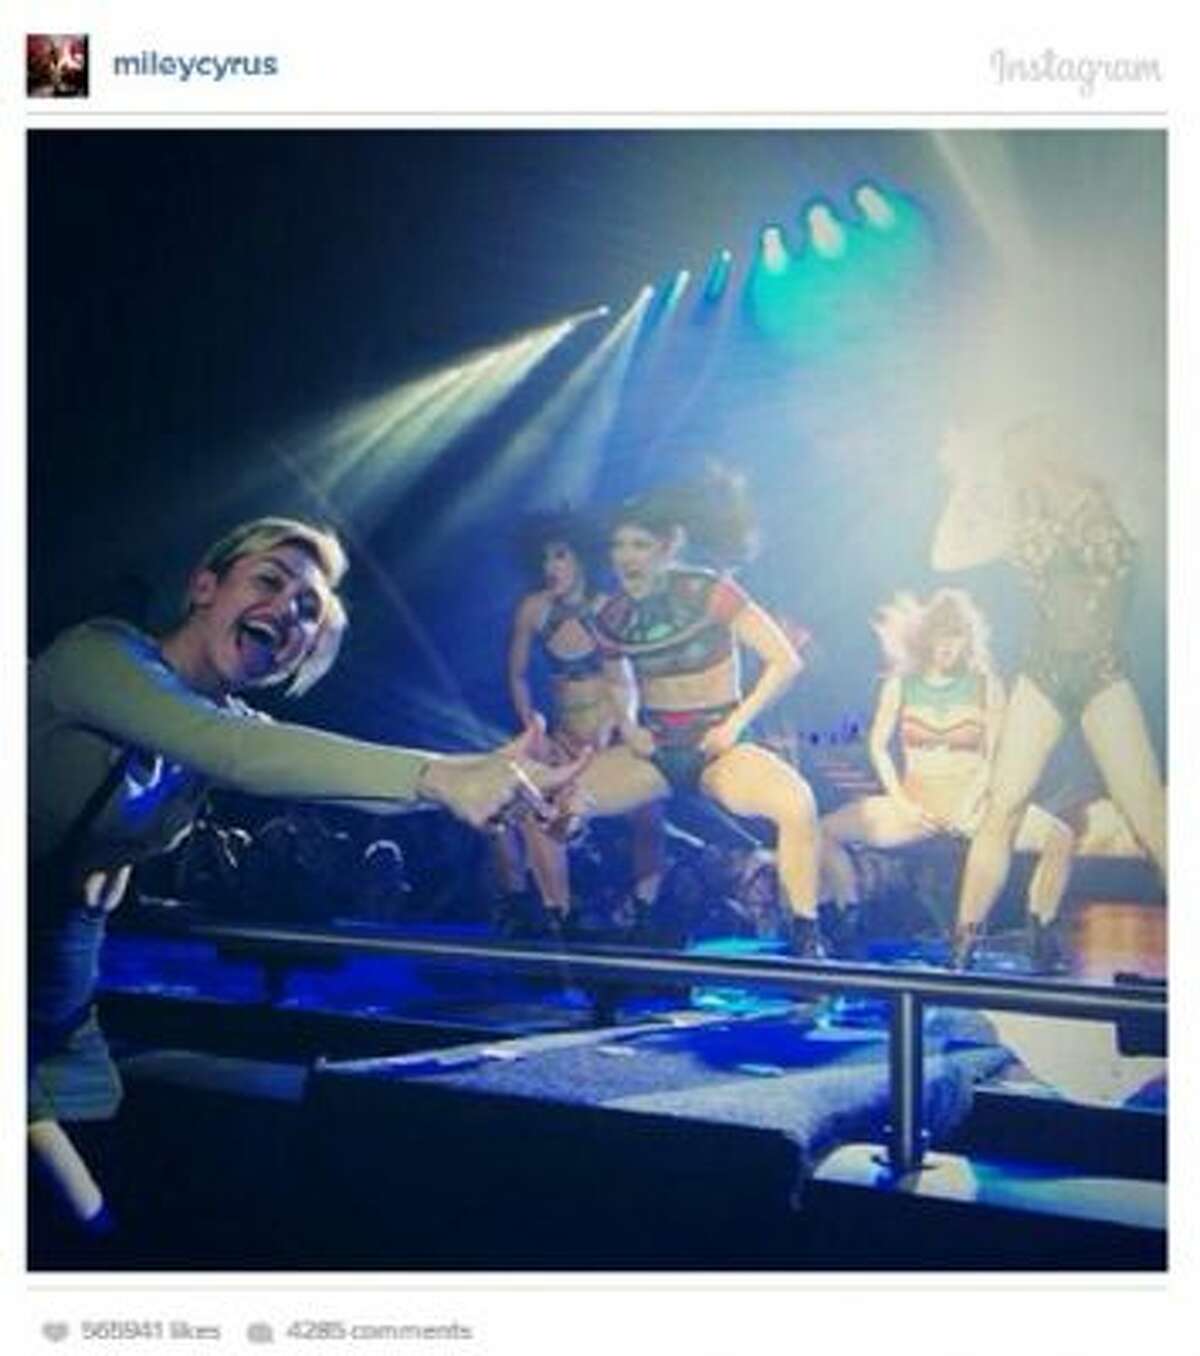 A screenshot of Miley Cyrus' Instagram account. Cyrus was spotted at the Britney Spears concert in Las Vegas.